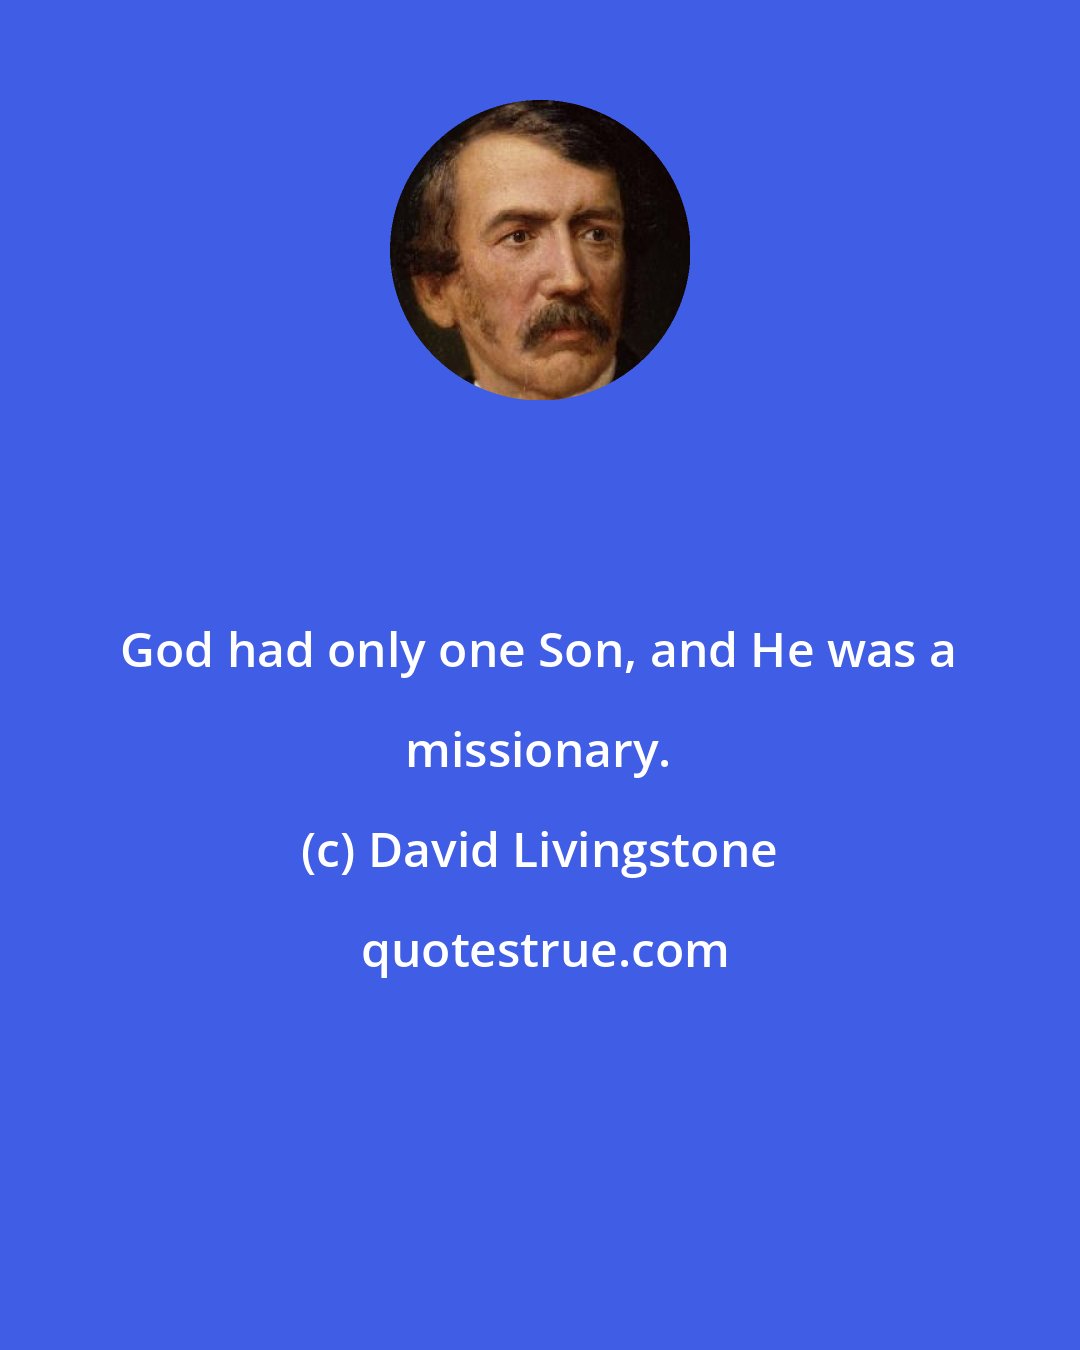 David Livingstone: God had only one Son, and He was a missionary.